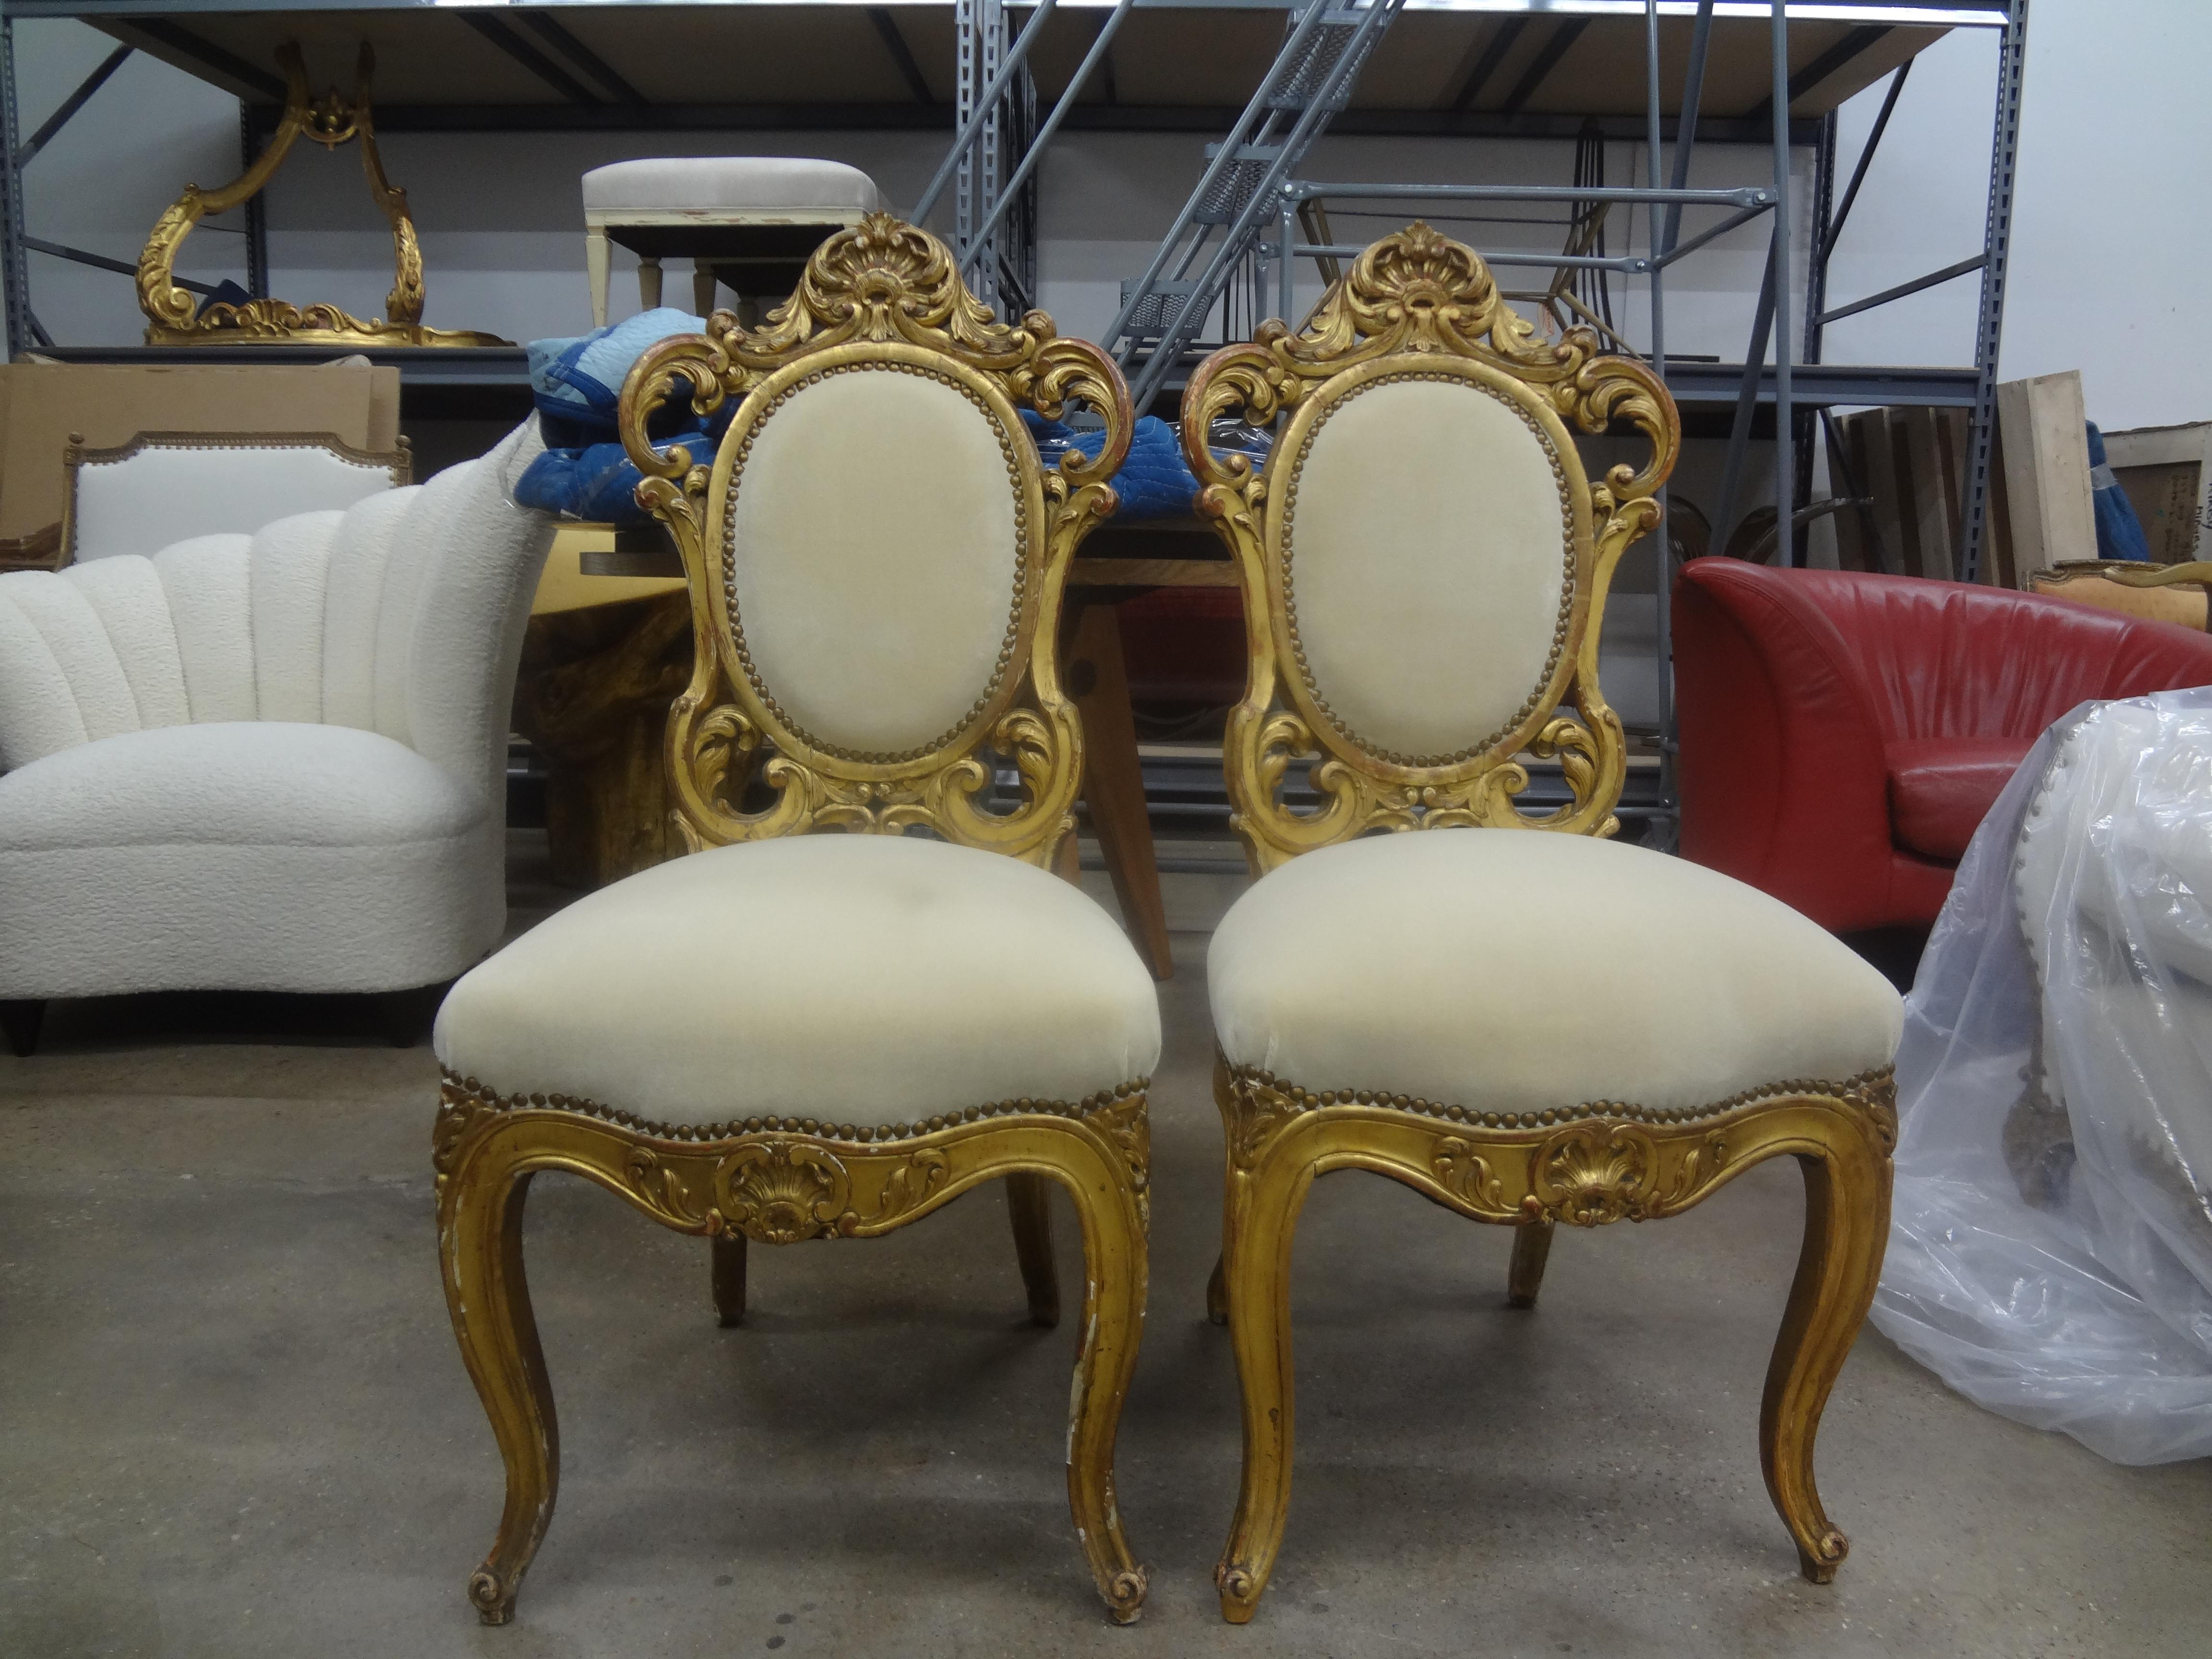 Pair of Italian Baroque style giltwood chairs.
Stunning pair of Roman Baroque style gilt wood chairs, circa 1920. These unusual chairs or side chairs have been recently upholstered in camel colored mohair with brass nail head detail.
Perfect